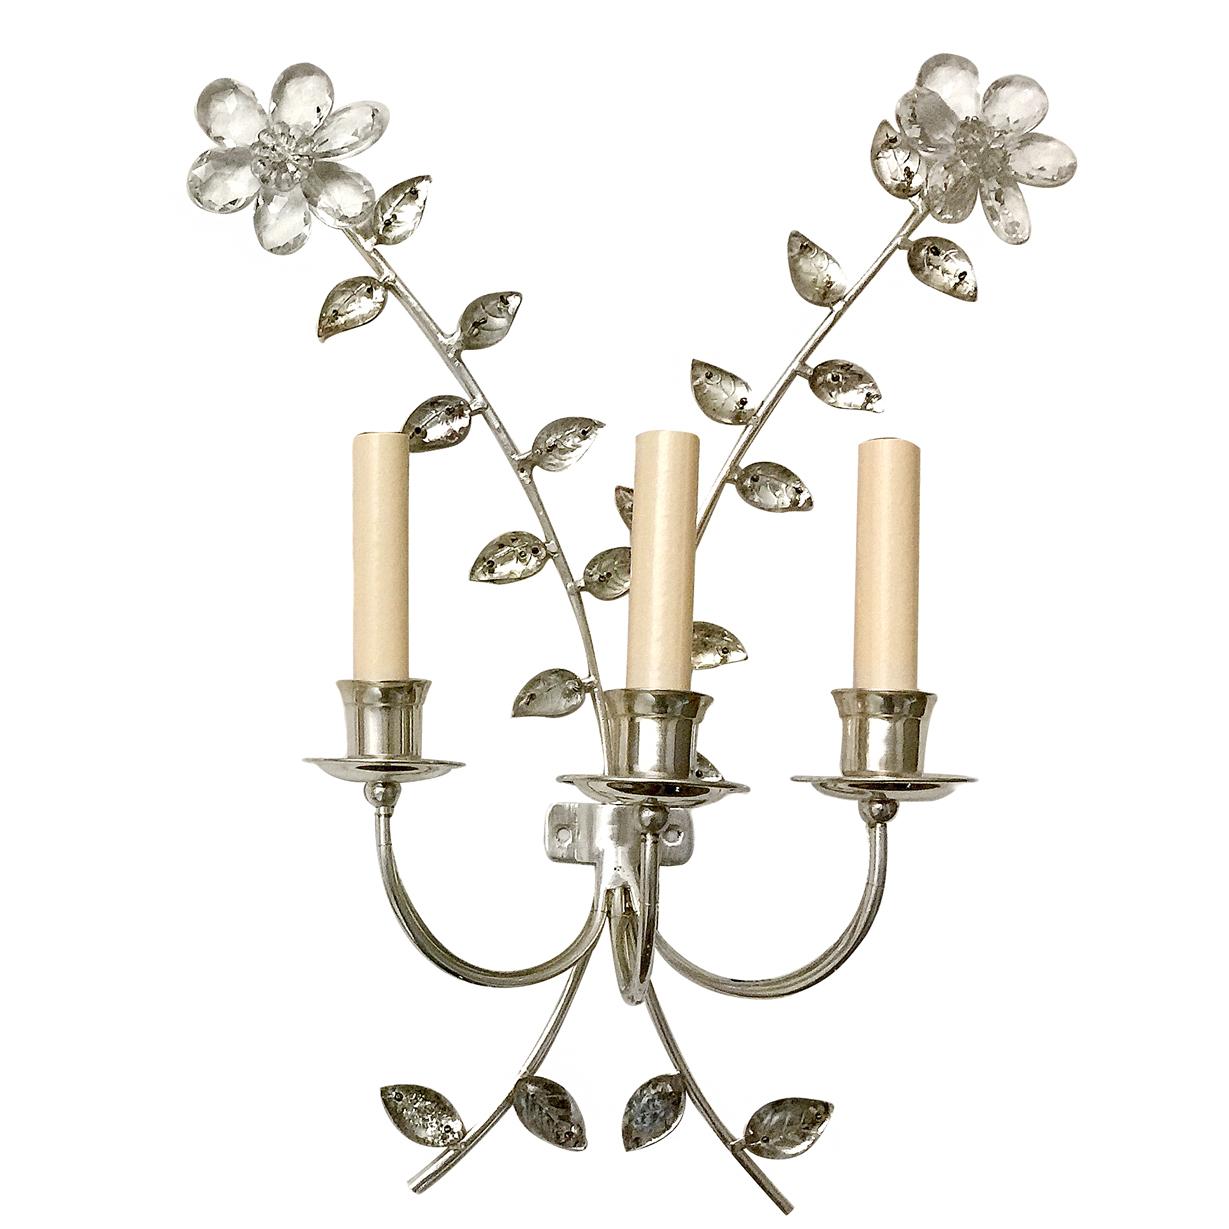 Pair of circa 1940s French silver plated three-light sconces with molded glass leaves and crystal flowers.

Measurements:
Height 20